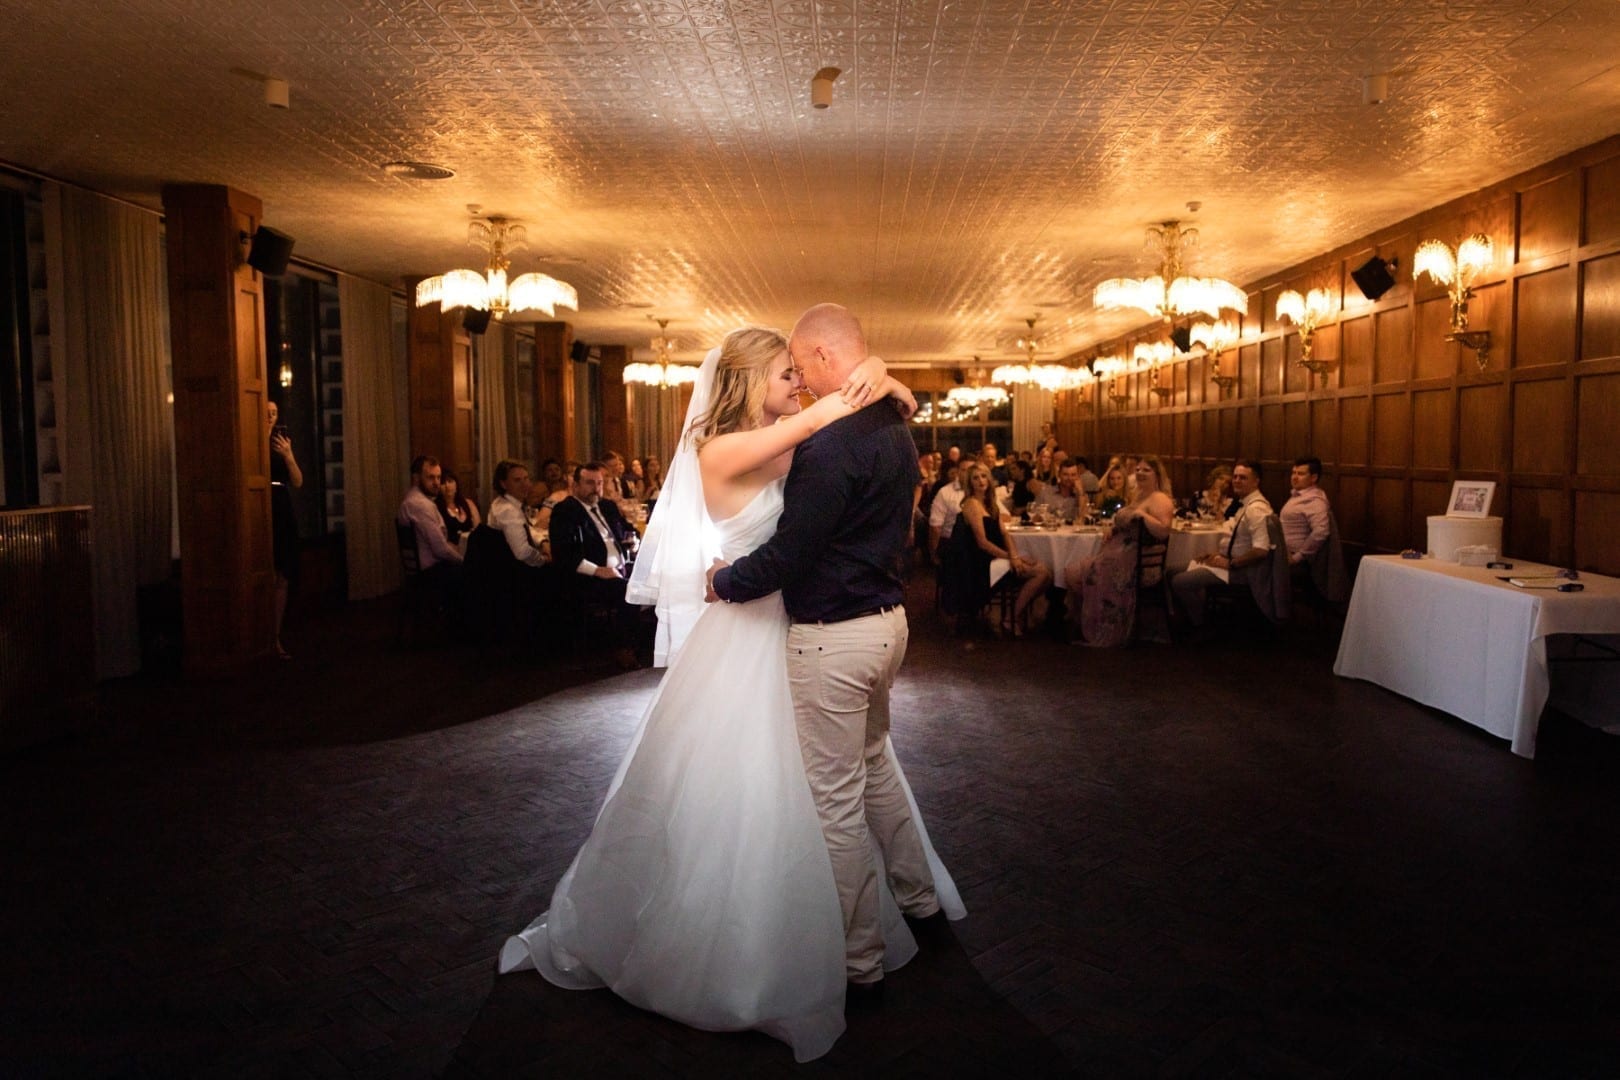 The first dance. 